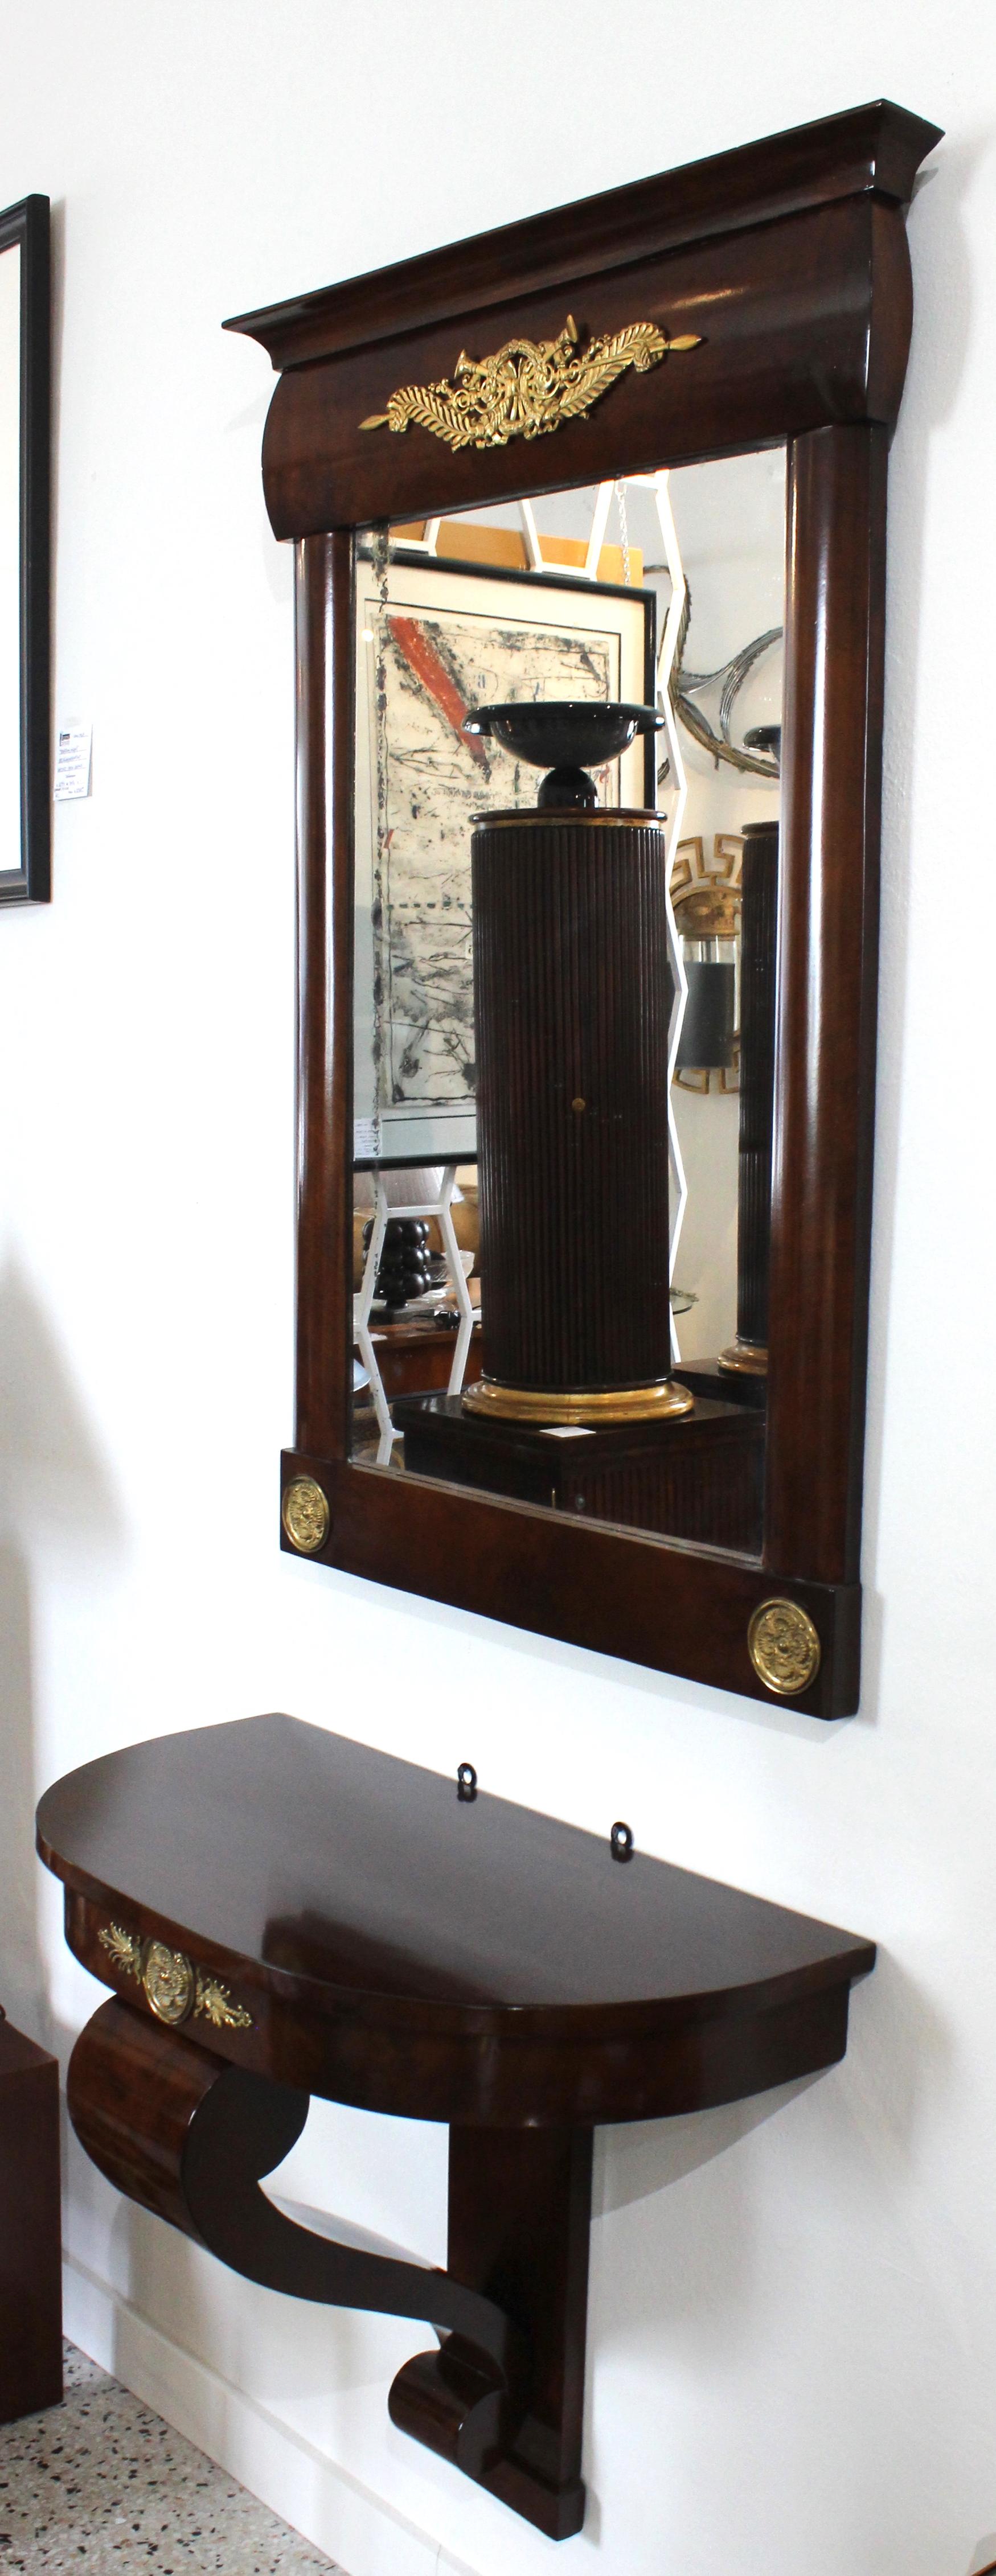 This stylish Empire style wall hung console and mirror date to the 19th century and were acquired in Austria. The piece is fabricated in mahogany with bronze doré mounts.

Note: Piece retains its original mirror.

Note: Wall shelf dimensions are